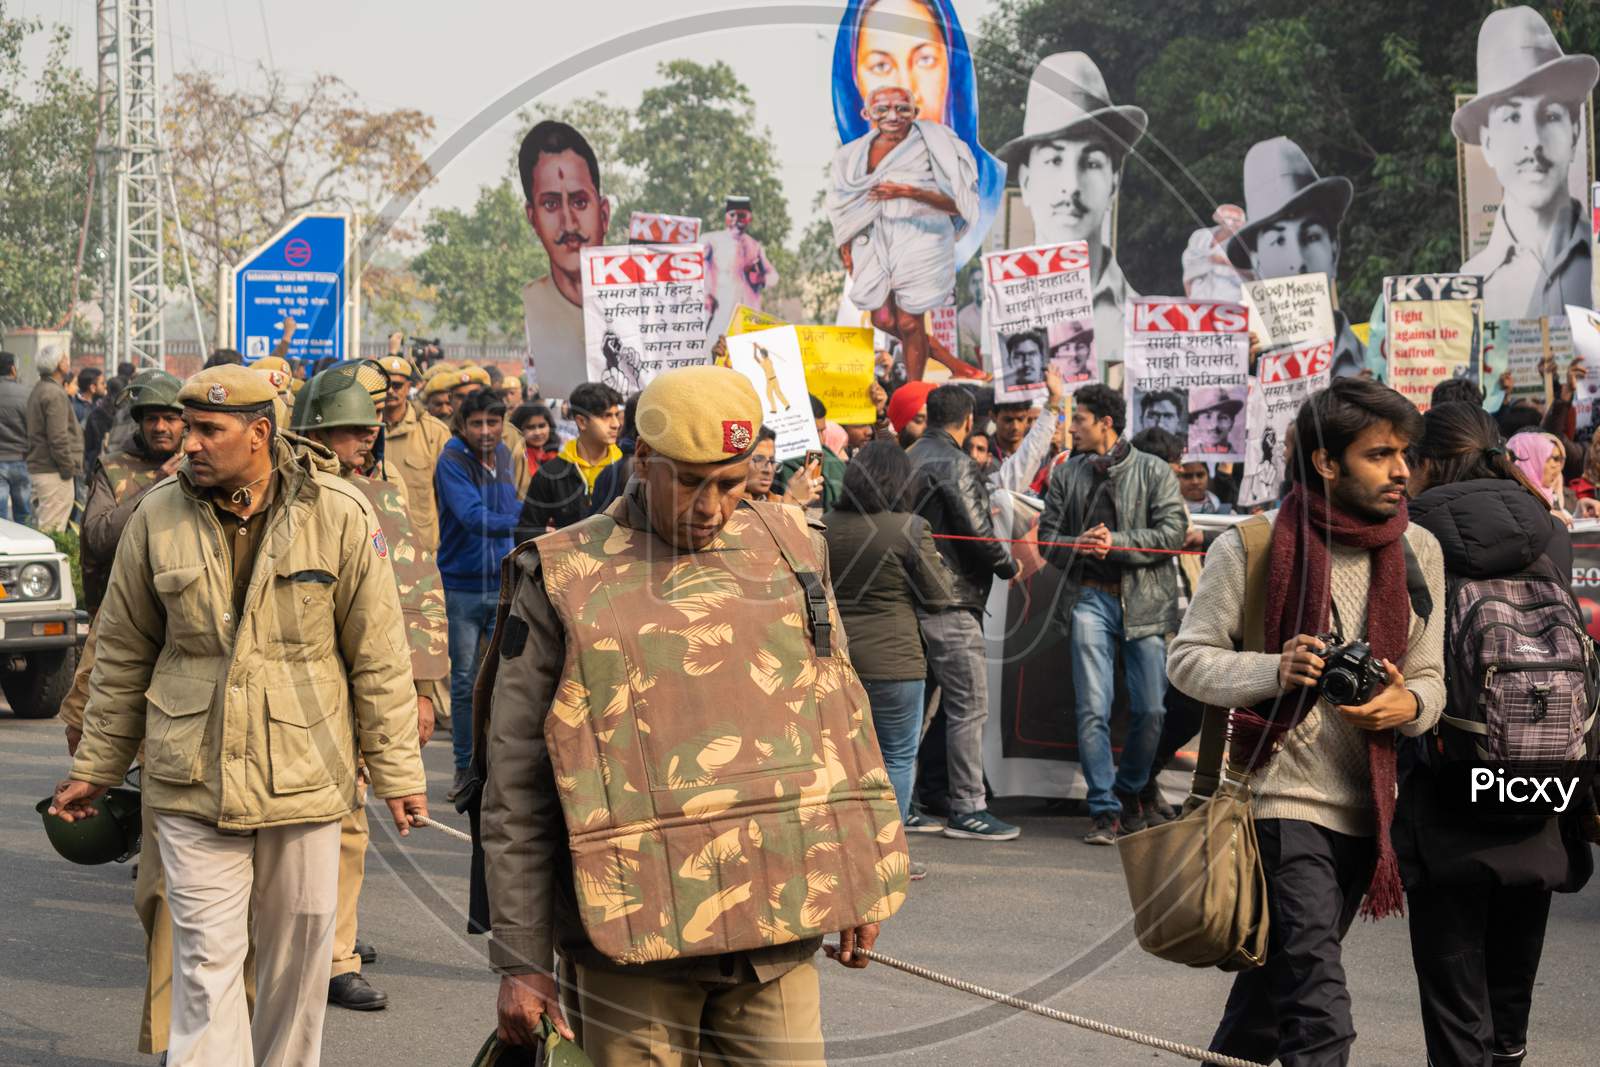 Delhi police during Protest by Krantikari Yuva Sangathan (KYS) and others against Citizenship Amendment Act CAA and National Register of Citizens NRC